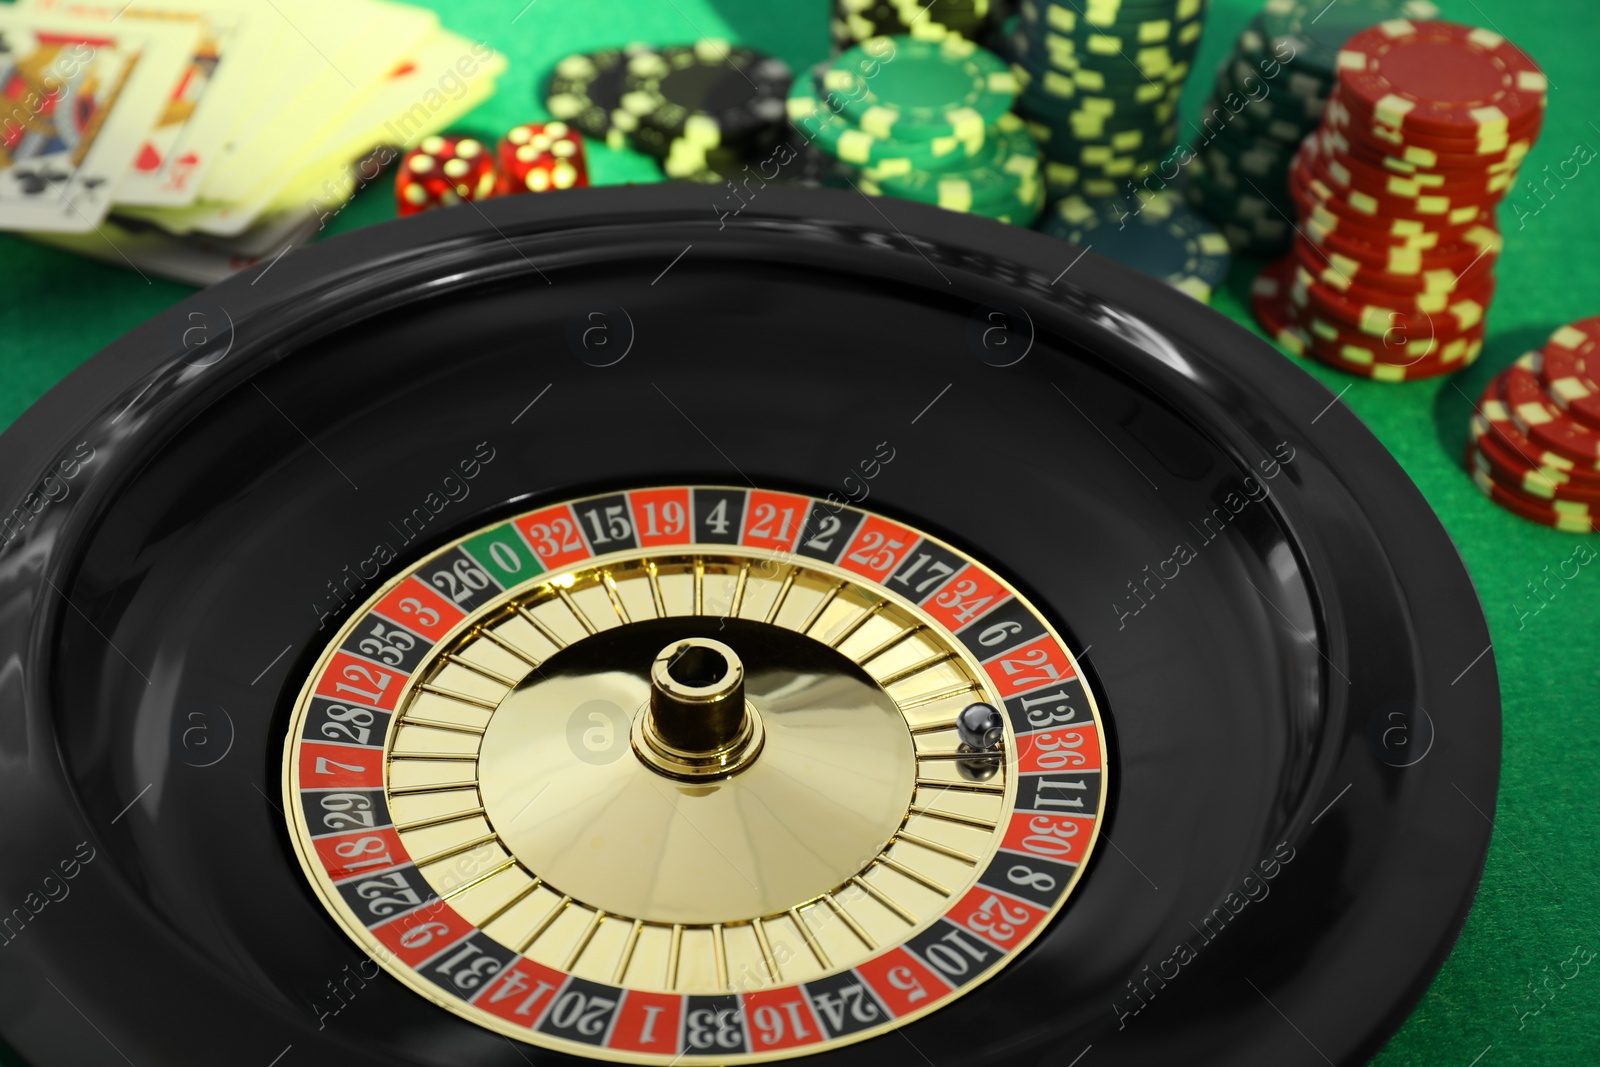 Photo of Roulette wheel with ball, playing cards and chips on green table, closeup. Casino game